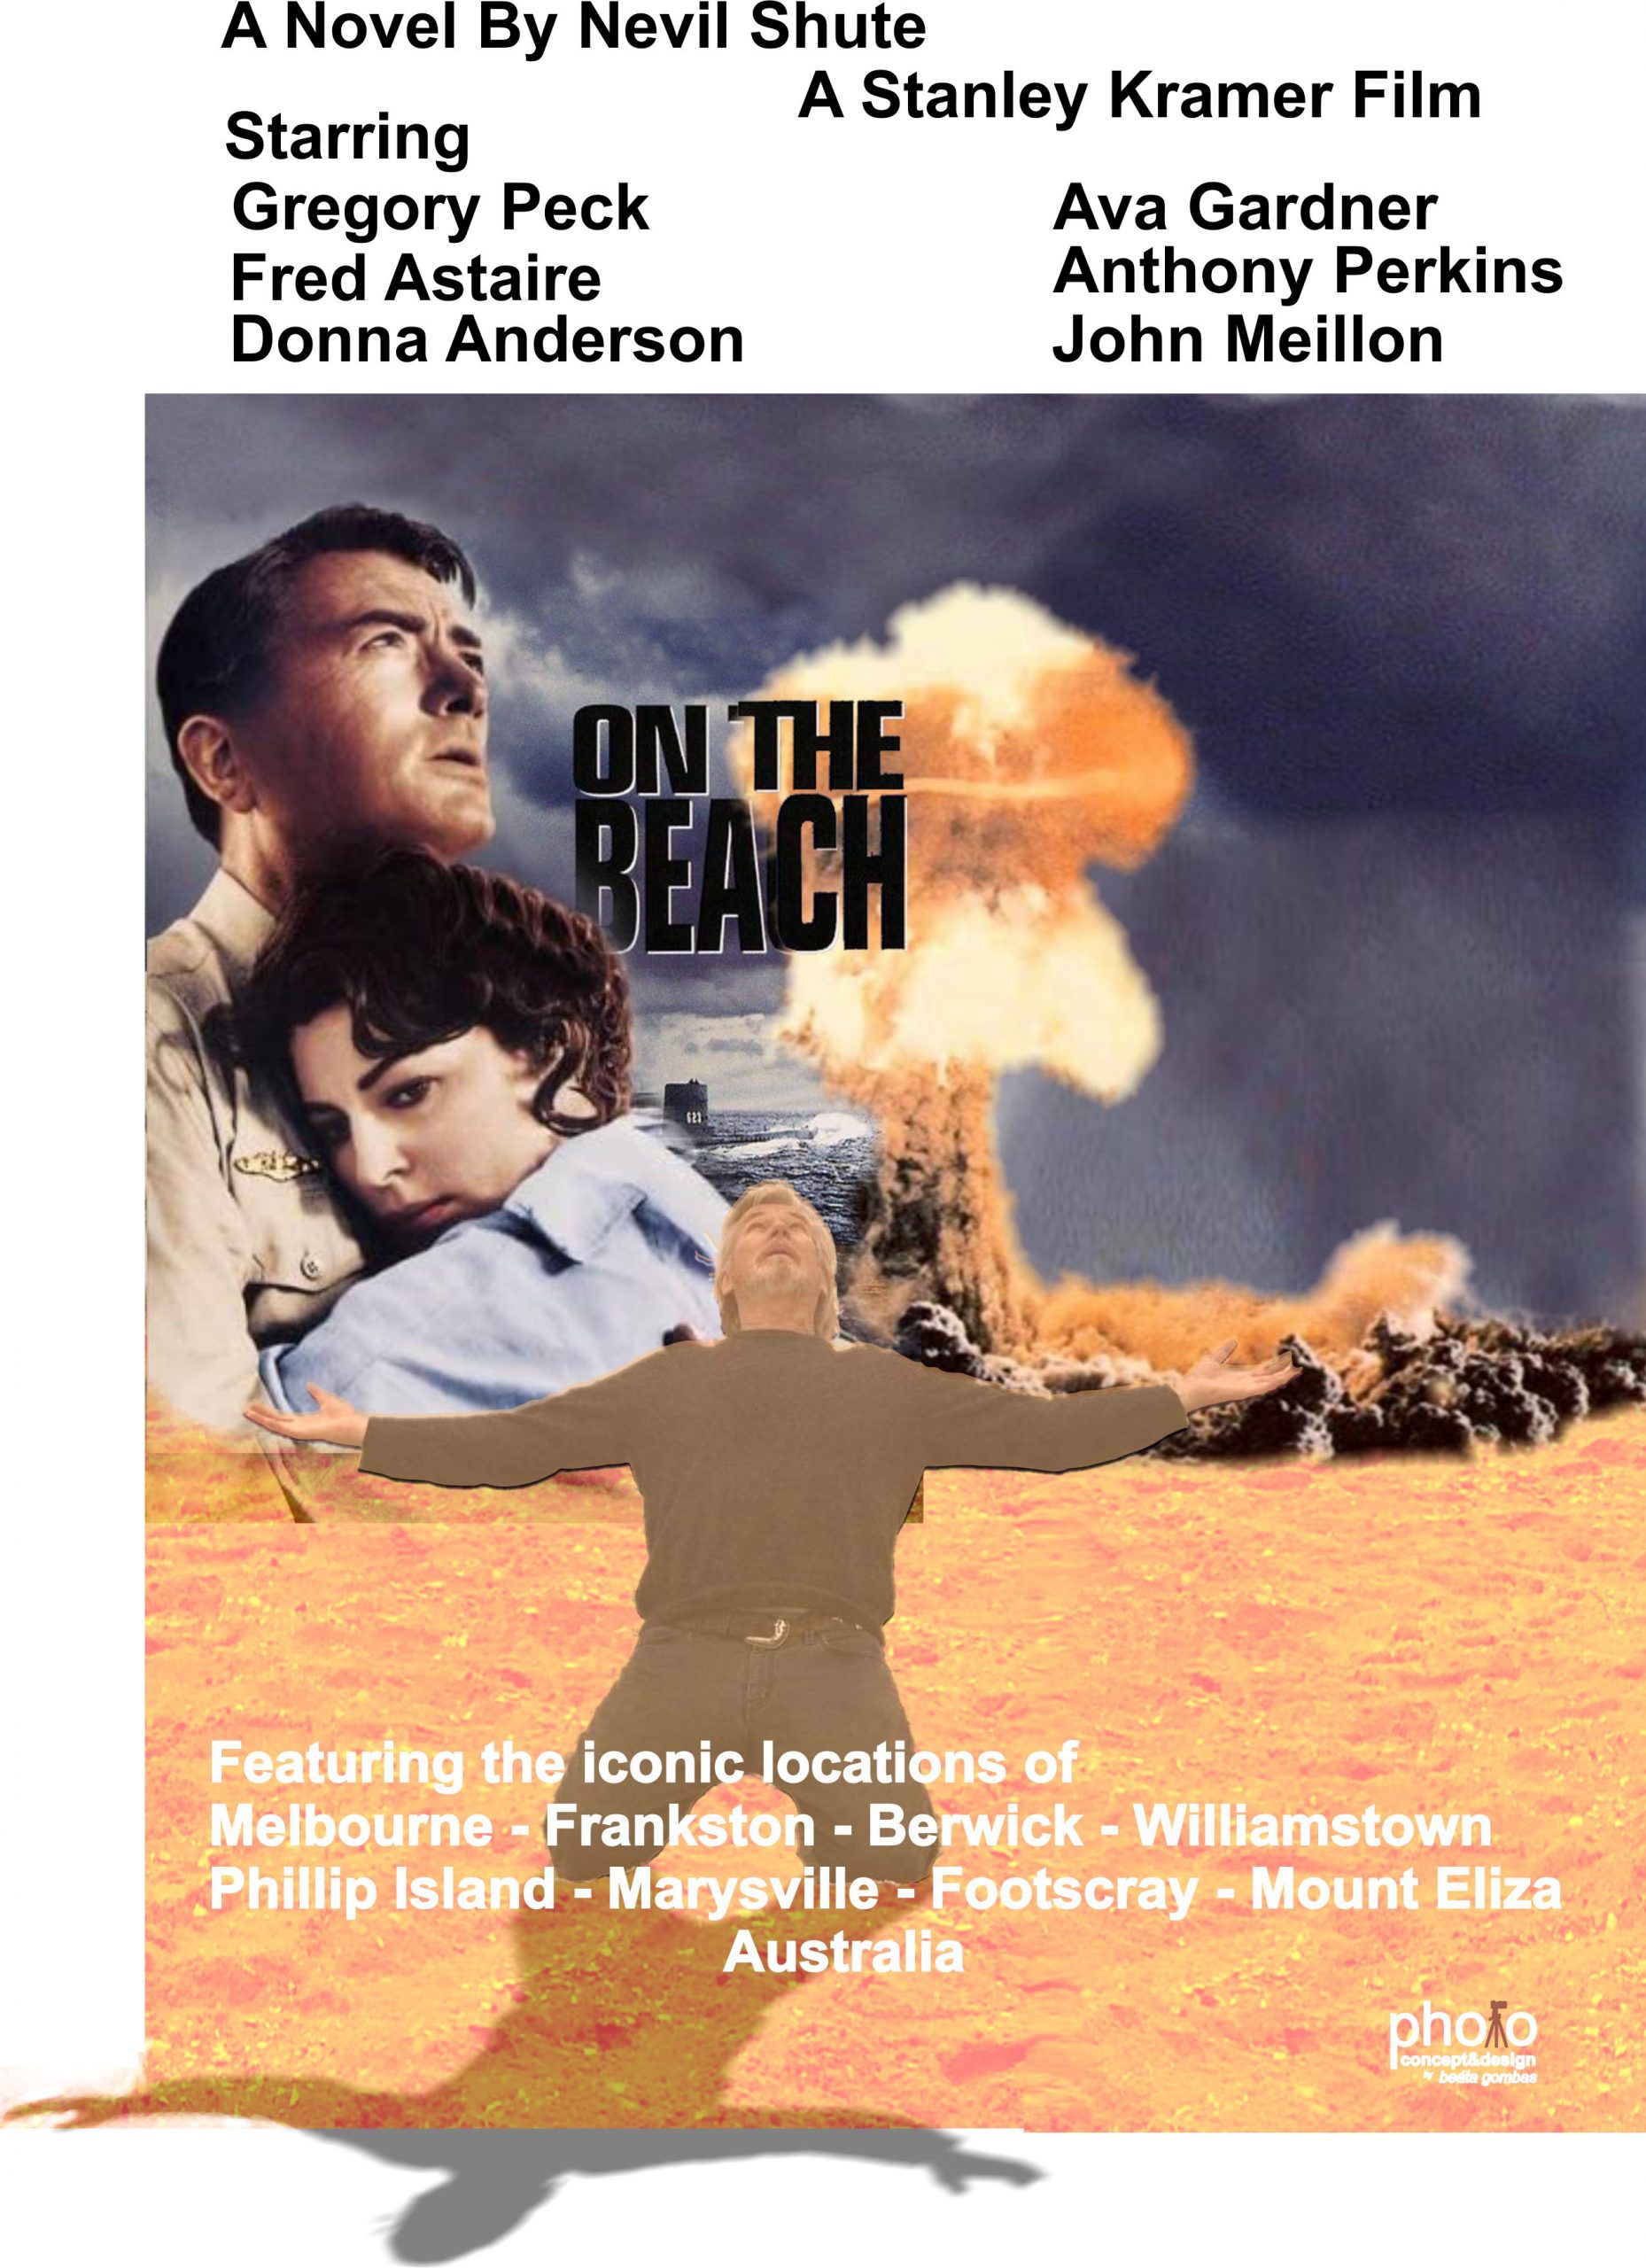 on the beach movie review 1959